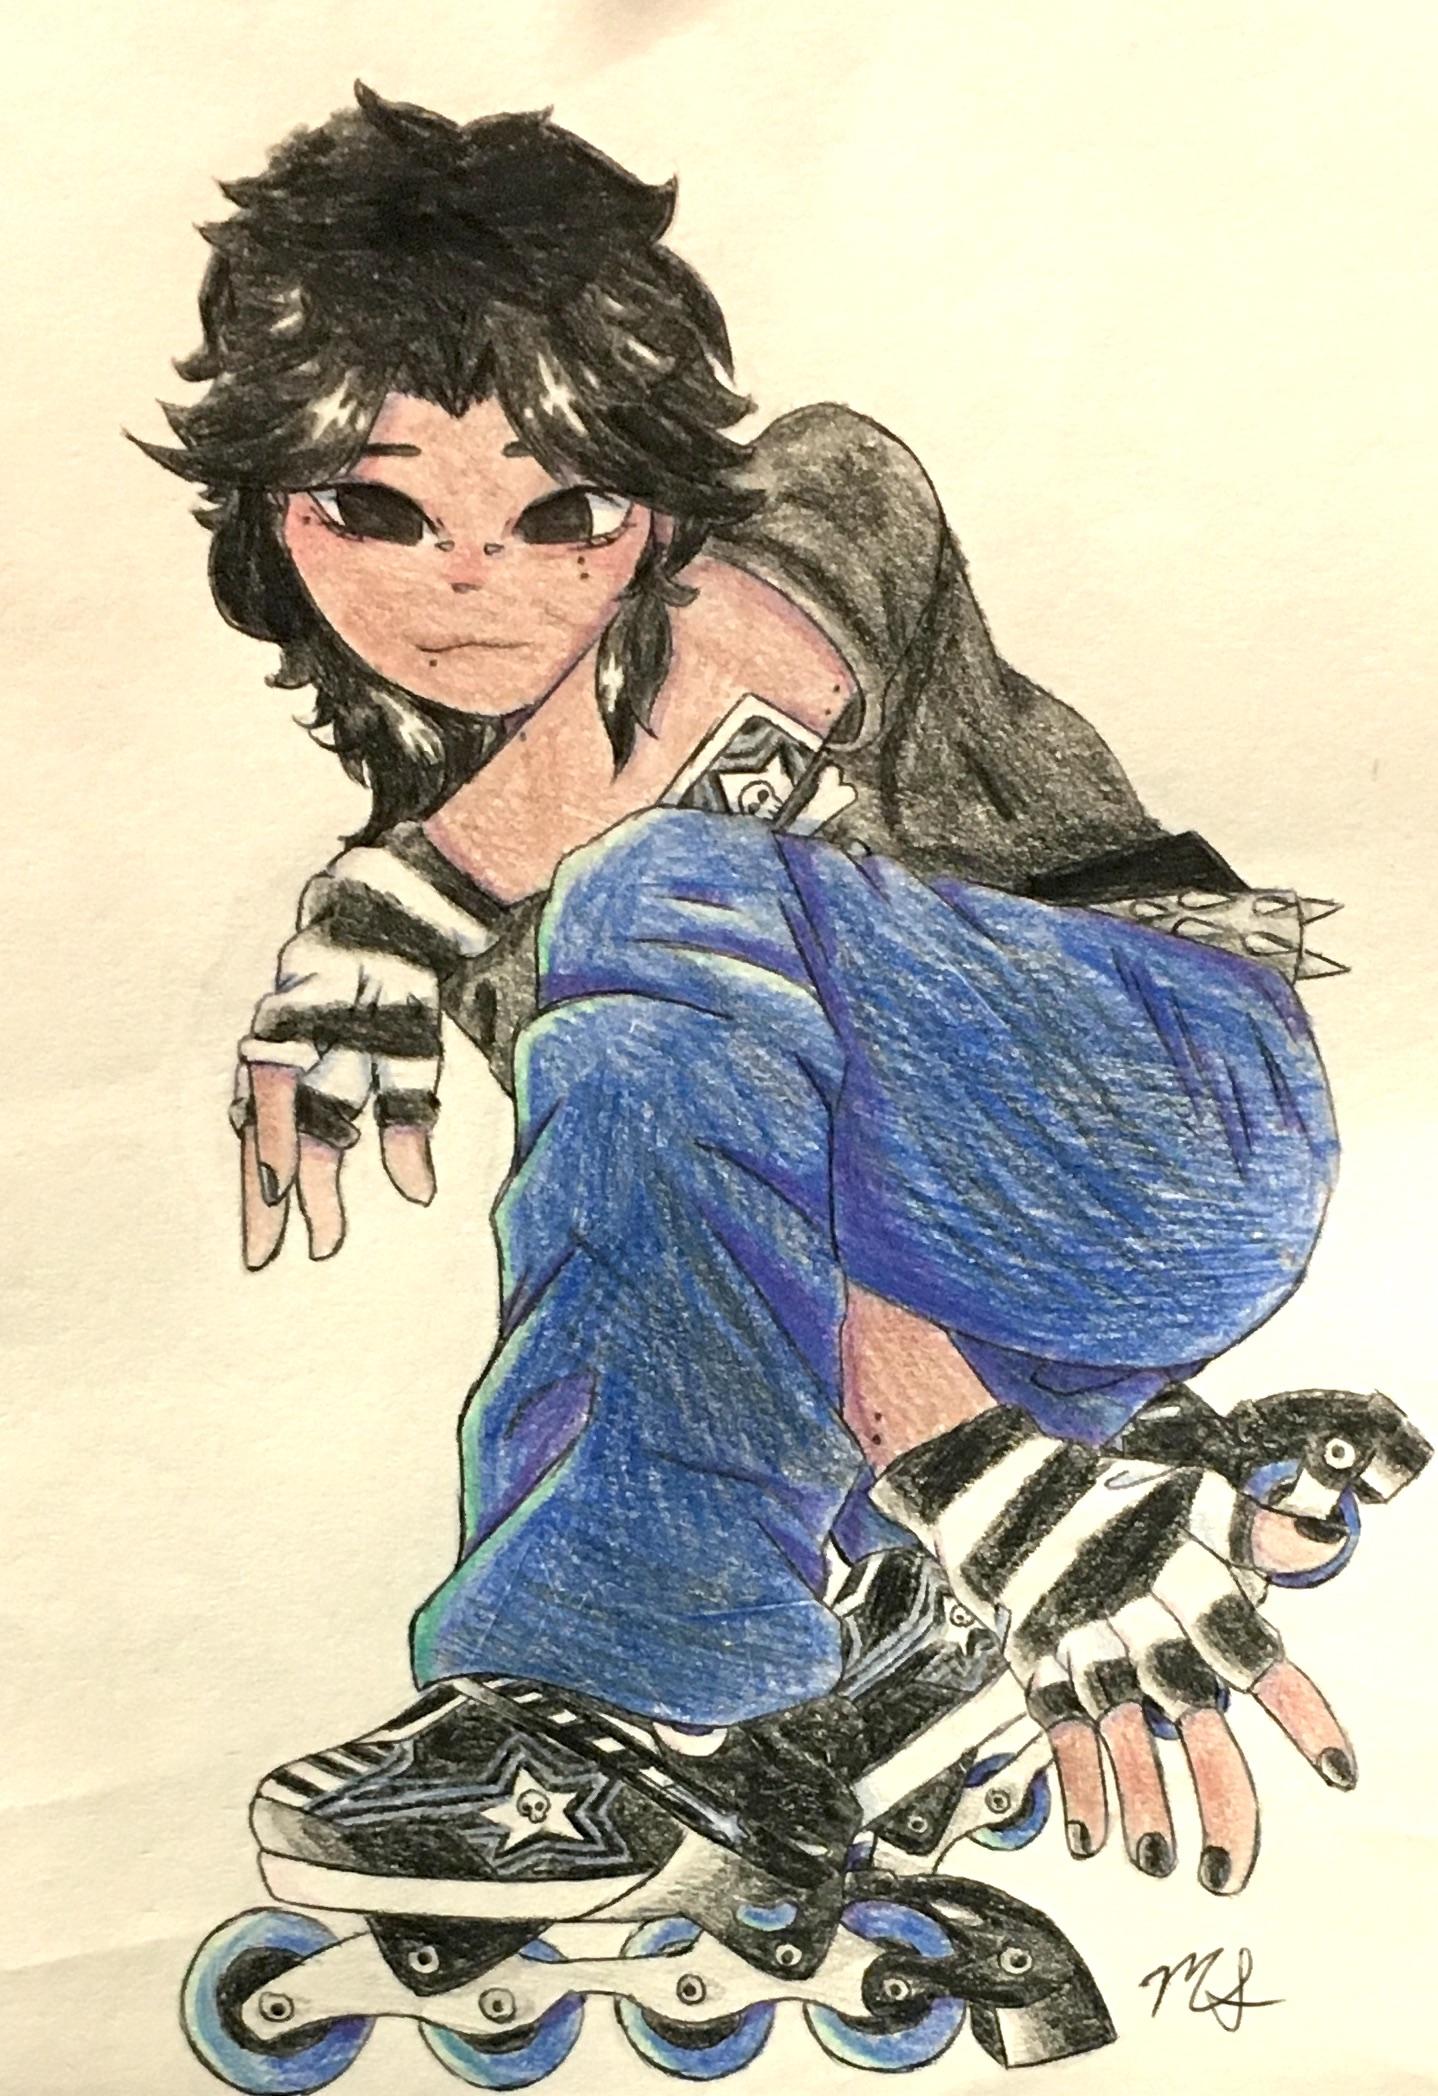 A colored pencil drawing of a rollerblader wearing black and blue with striped fingerless gloves, a metal spiked belt, and star and skull logos on their rollerblades and shirt. The rollerblader is low to the ground with one elbow on their knee and the other arm sticking out diagonally through their legs.